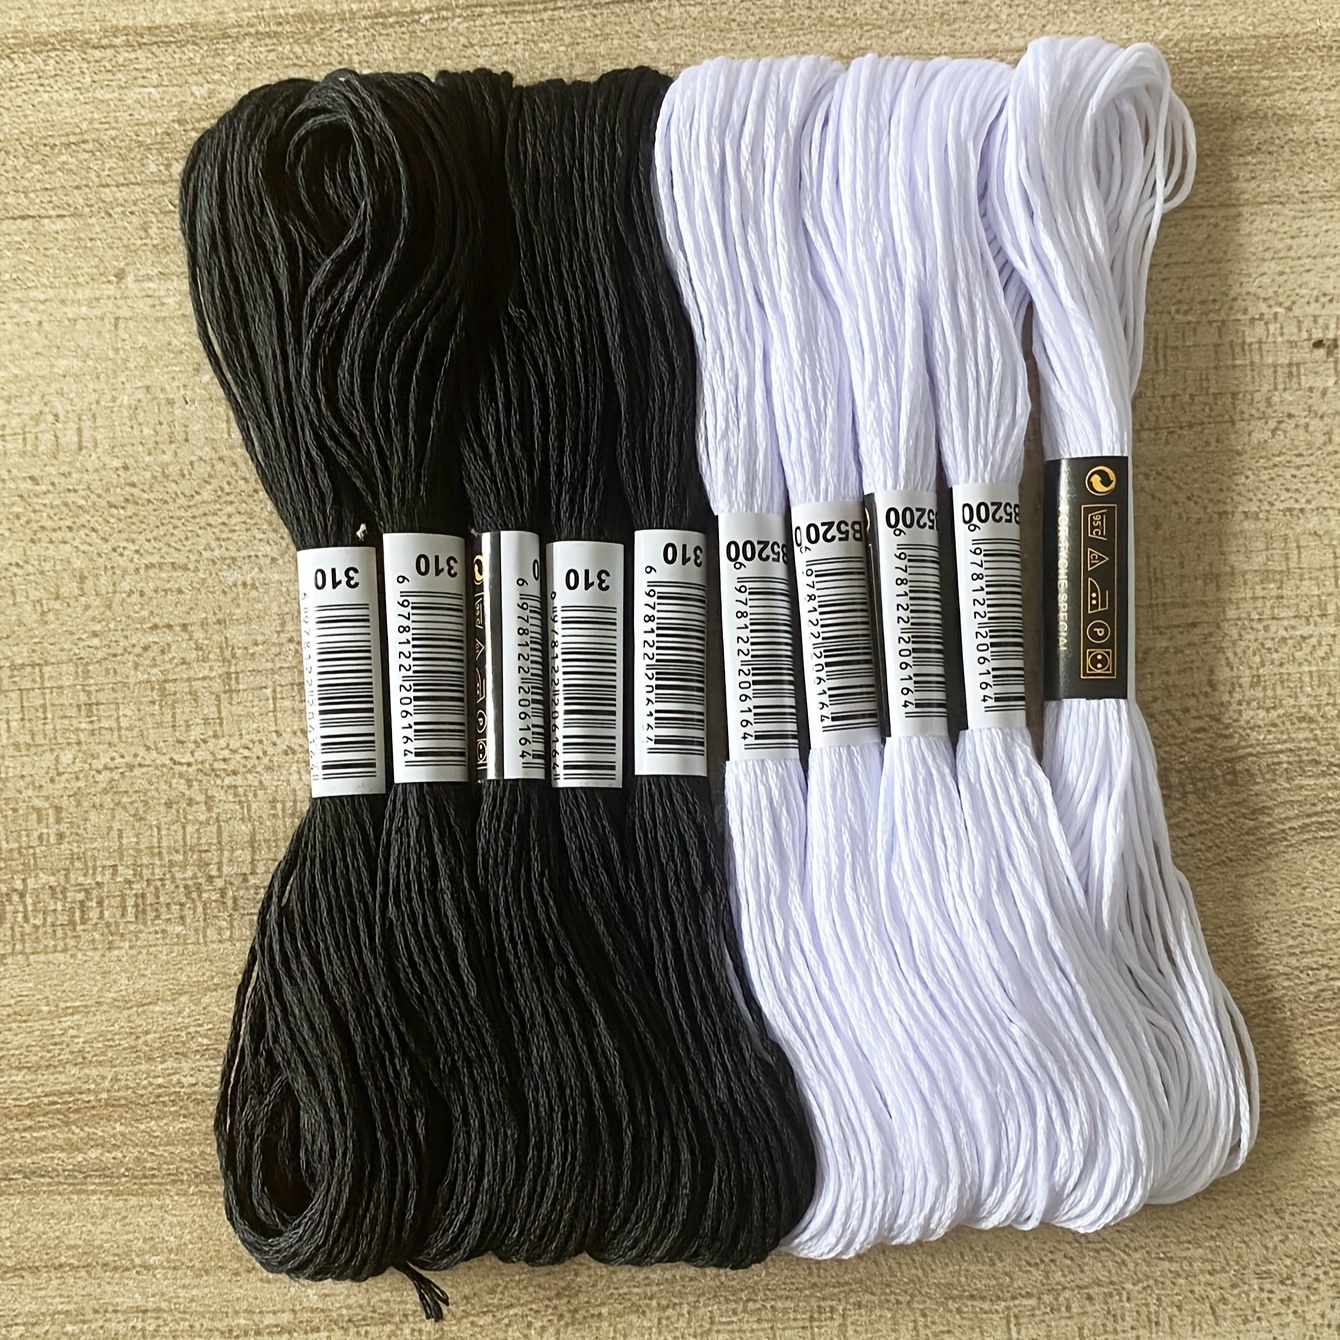 DMC 310 Black Stranded Cotton Thread for Hand Embroidery or Cross